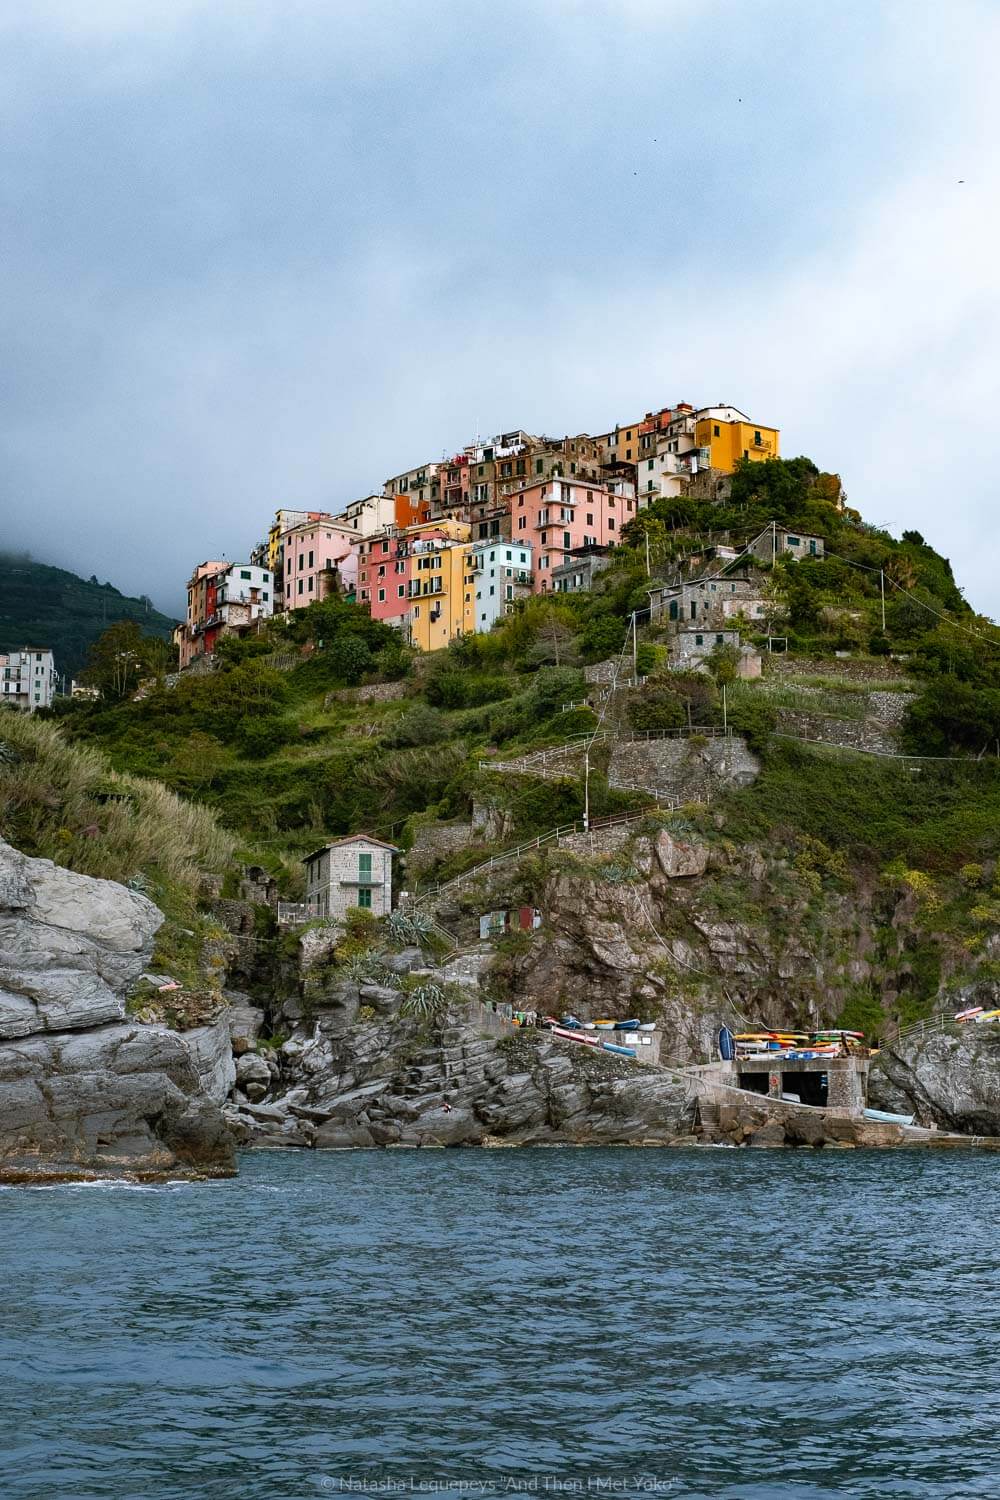 Corniglia from the water, Cinque Terre. Travel photography and guide by © Natasha Lequepeys for "And Then I Met Yoko". #cinqueterre #italy #travelphotography